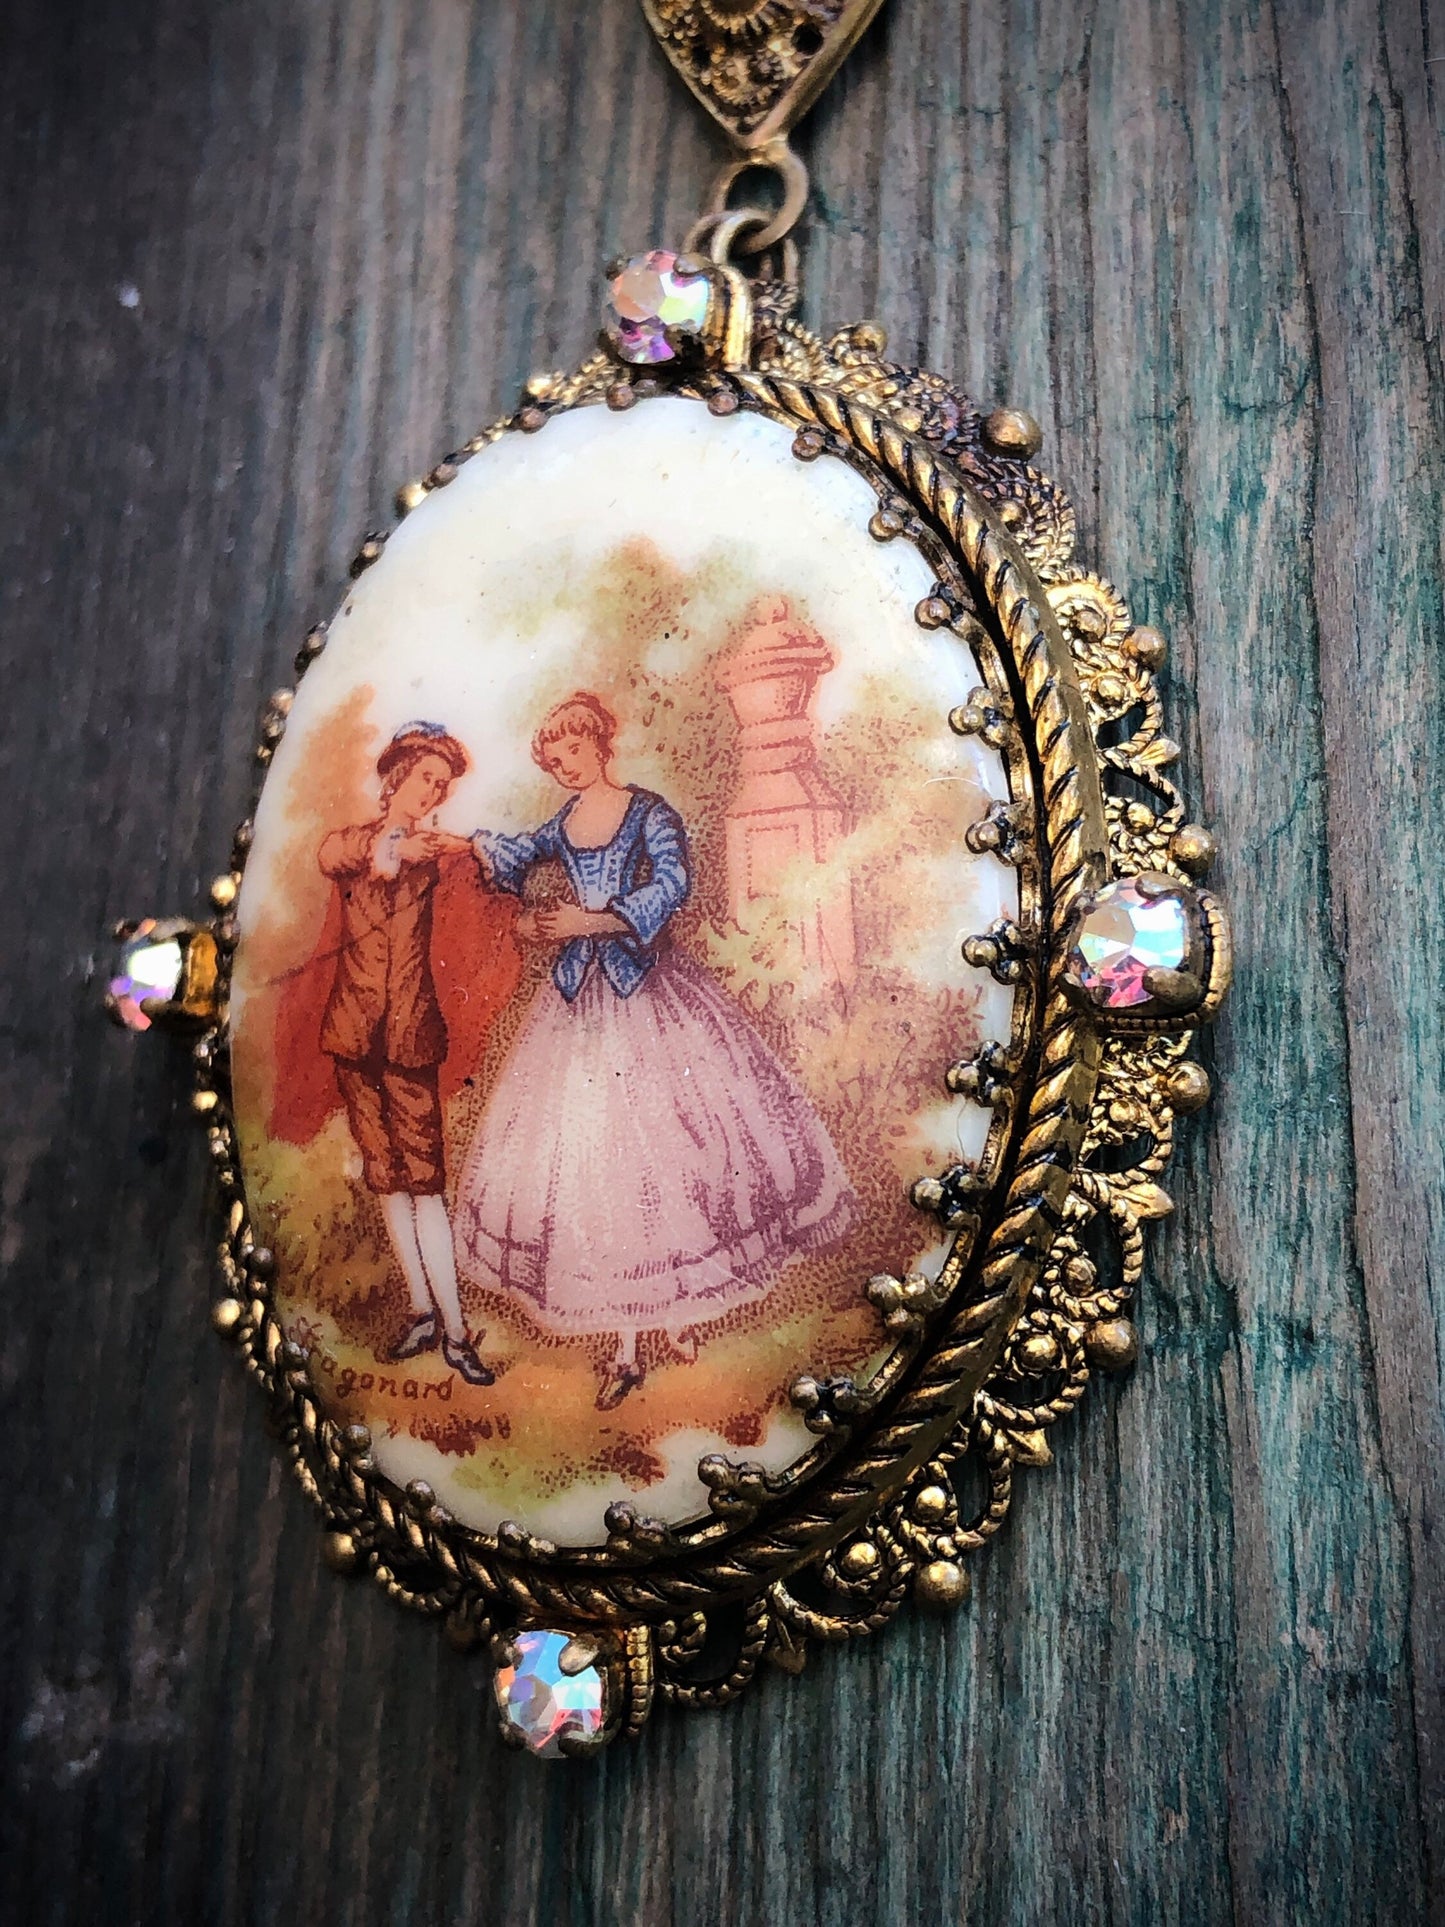 Vintage Signed Fragonard Courting Couple Limoge West German Gold Filigree Cameo Necklace with Aurora Borealis Crystal & Pearl